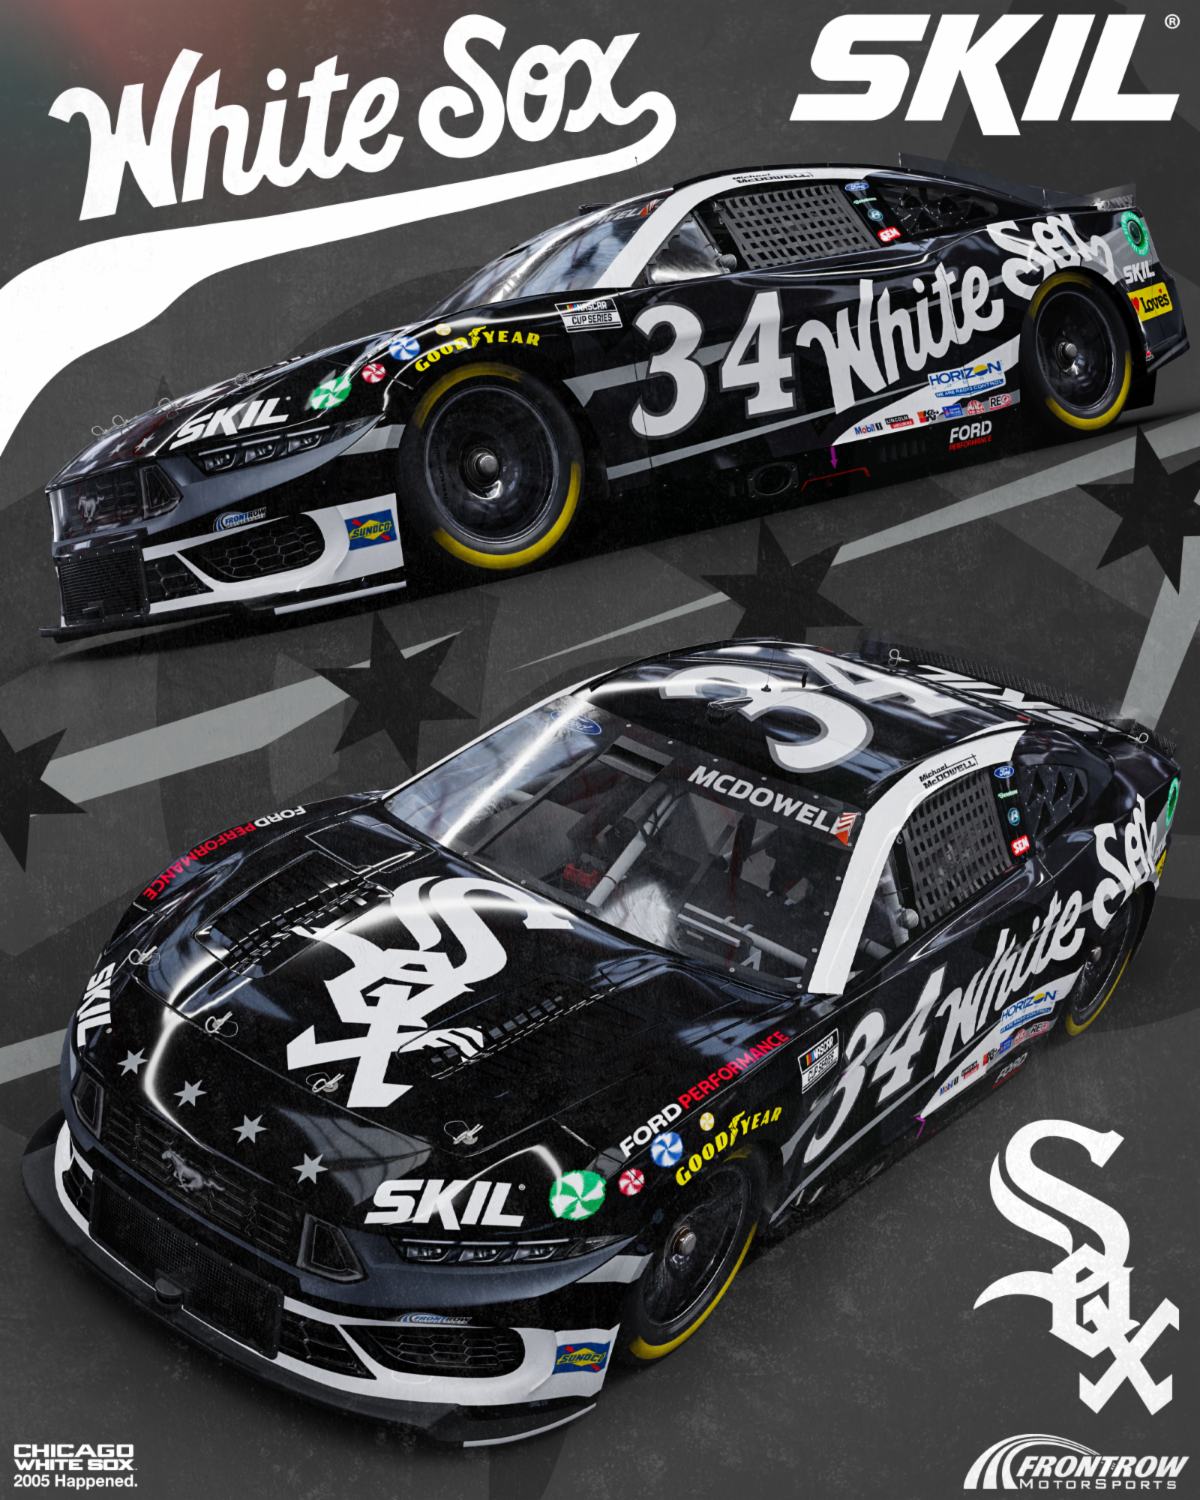 Chicago White Sox, Front Row Motorsports Announce2024 NASCAR Chicago Street Race PartnershipSox Designated as Primary Sponsor for Michael McDowell’s No. 34